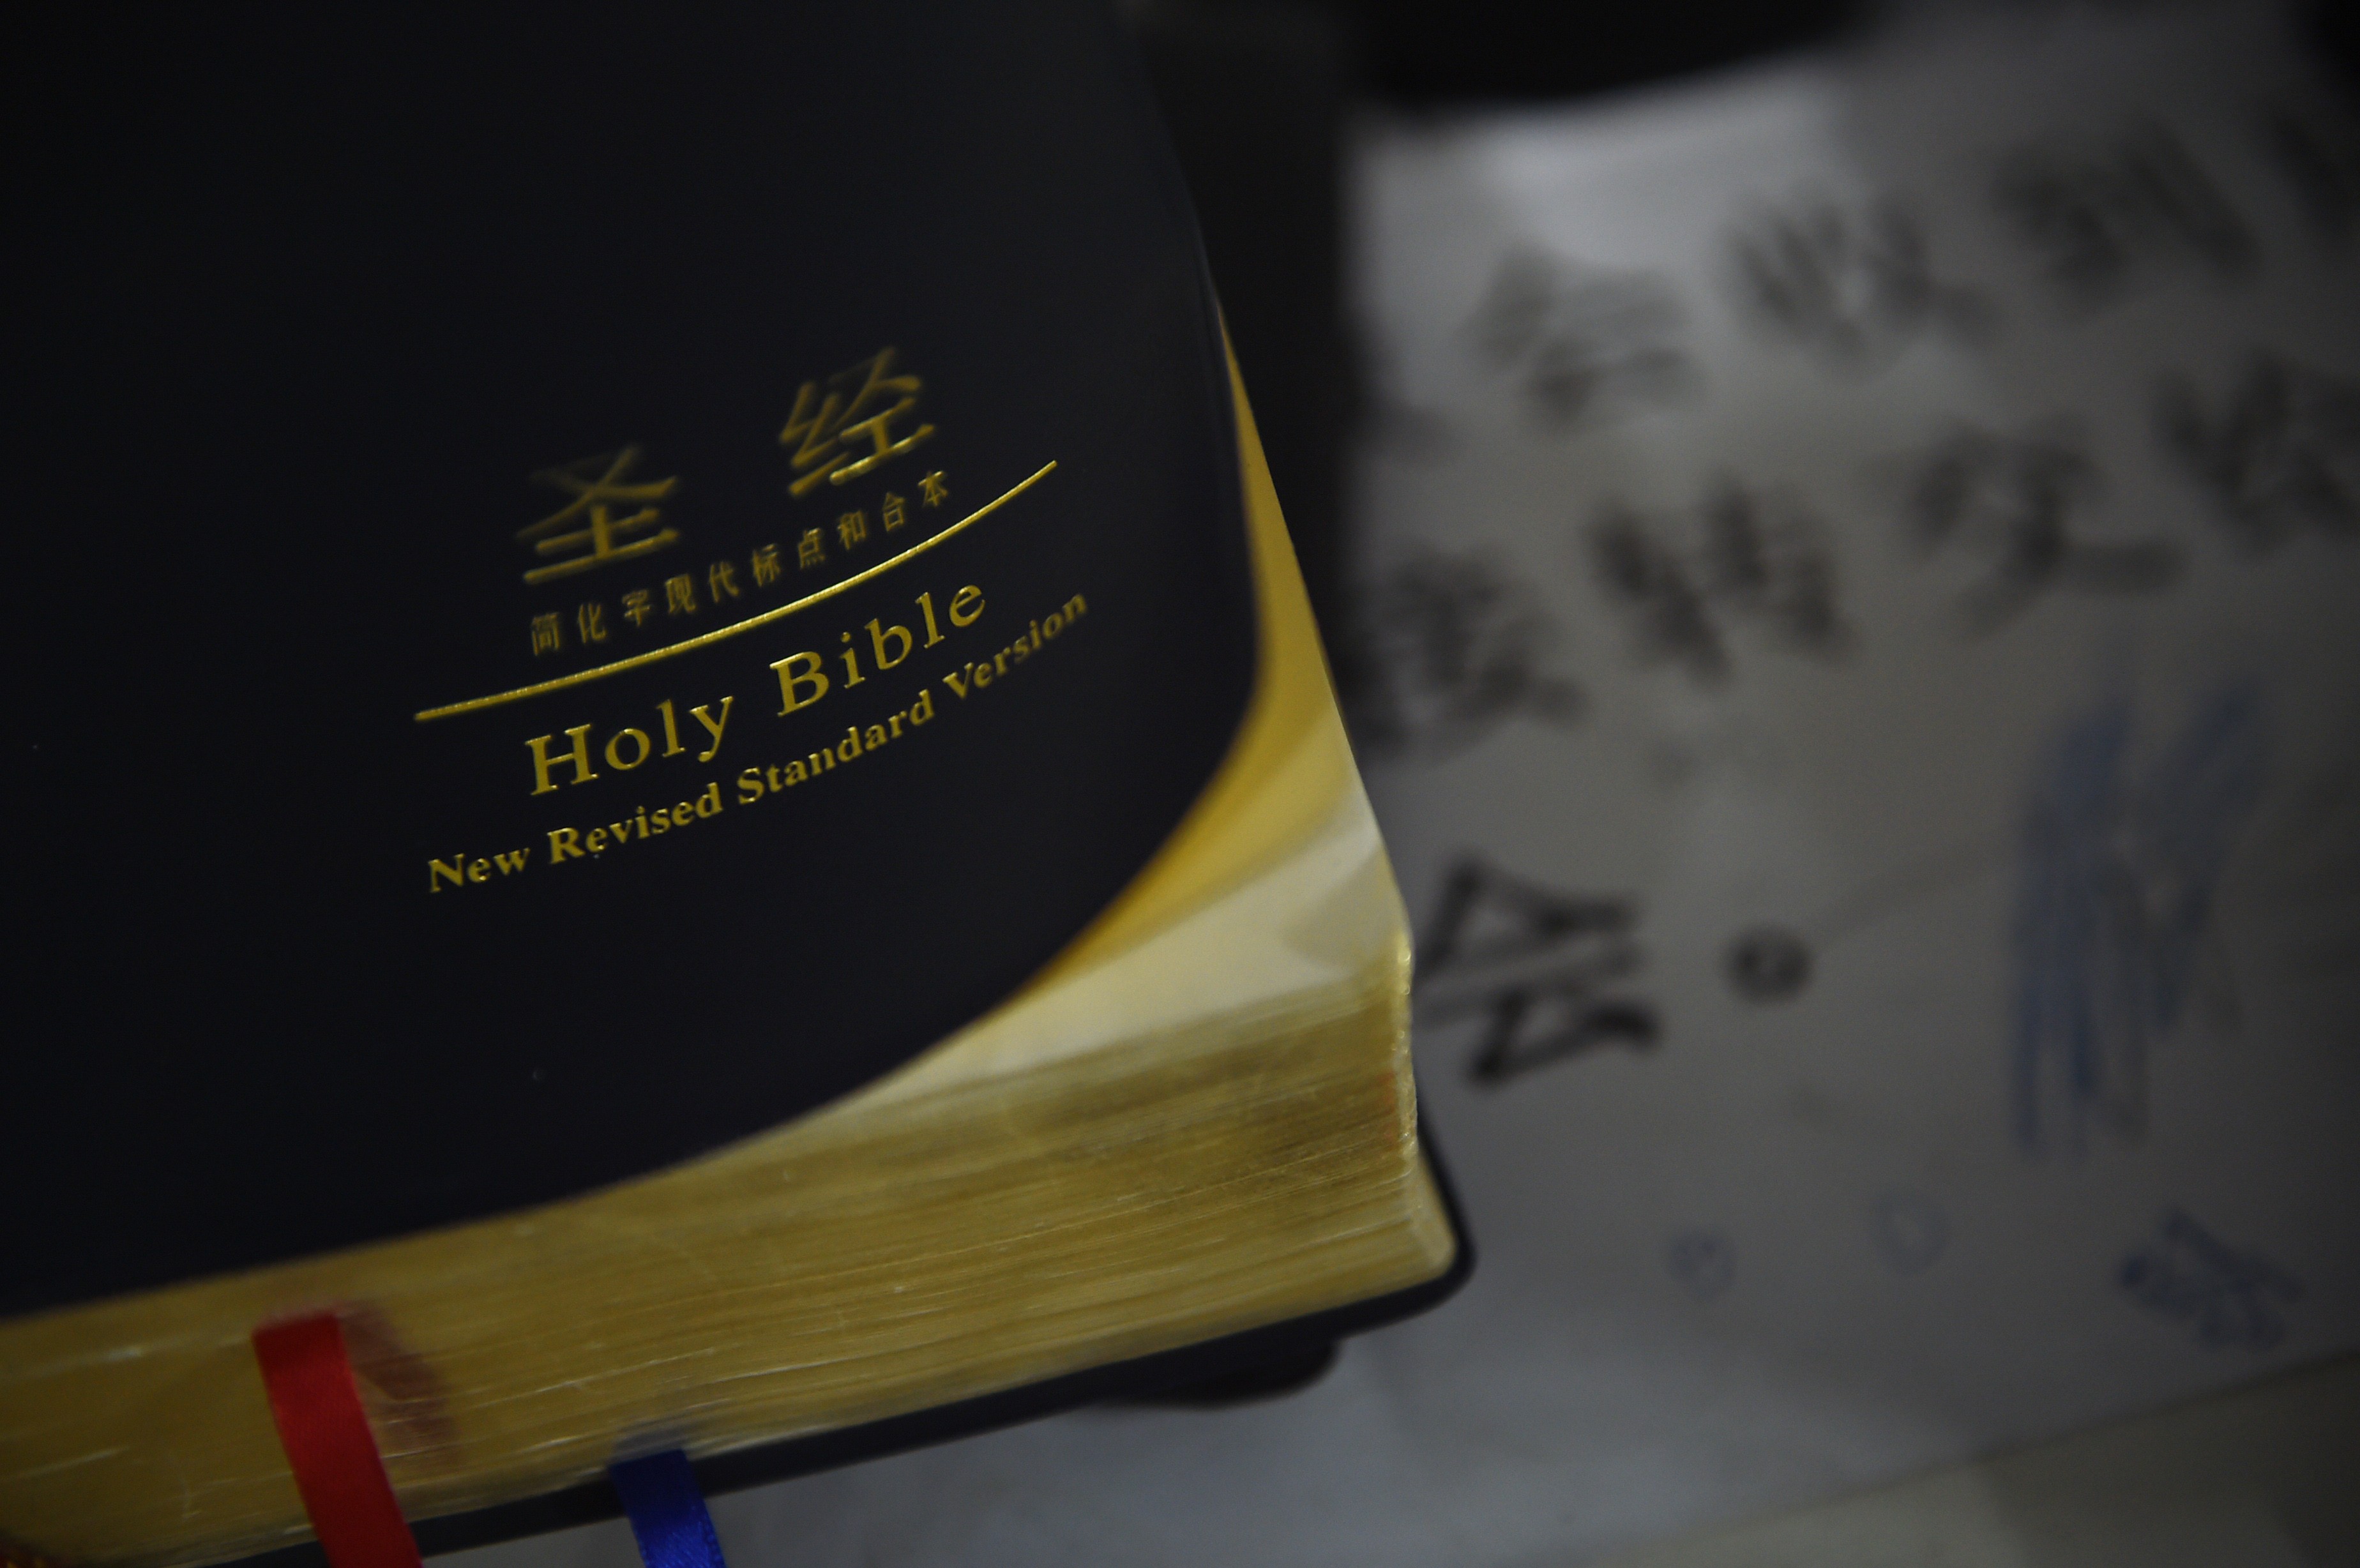 The Bible has been withdrawn from many of China’s retail websites in an apparent move by Beijing to strictly enforce rules governing the sale of the religious text. Photo: AFP